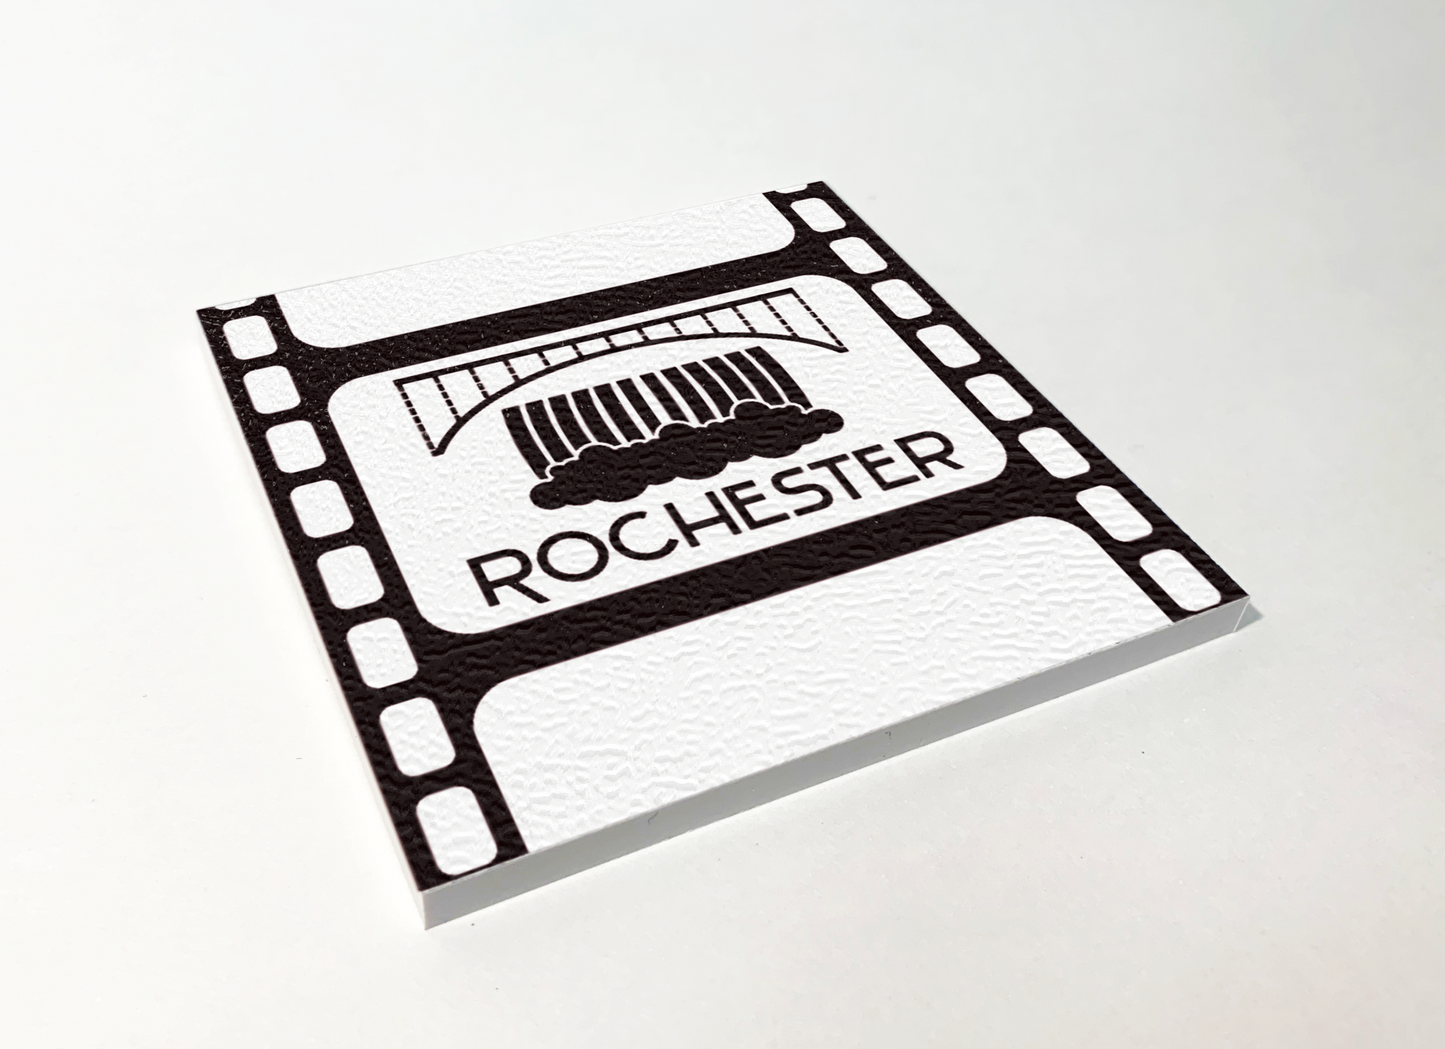 Rochester Lower Falls Filmstrip ABS Plastic Coaster 4 Pack Designed and Handcrafted in Buffalo NY